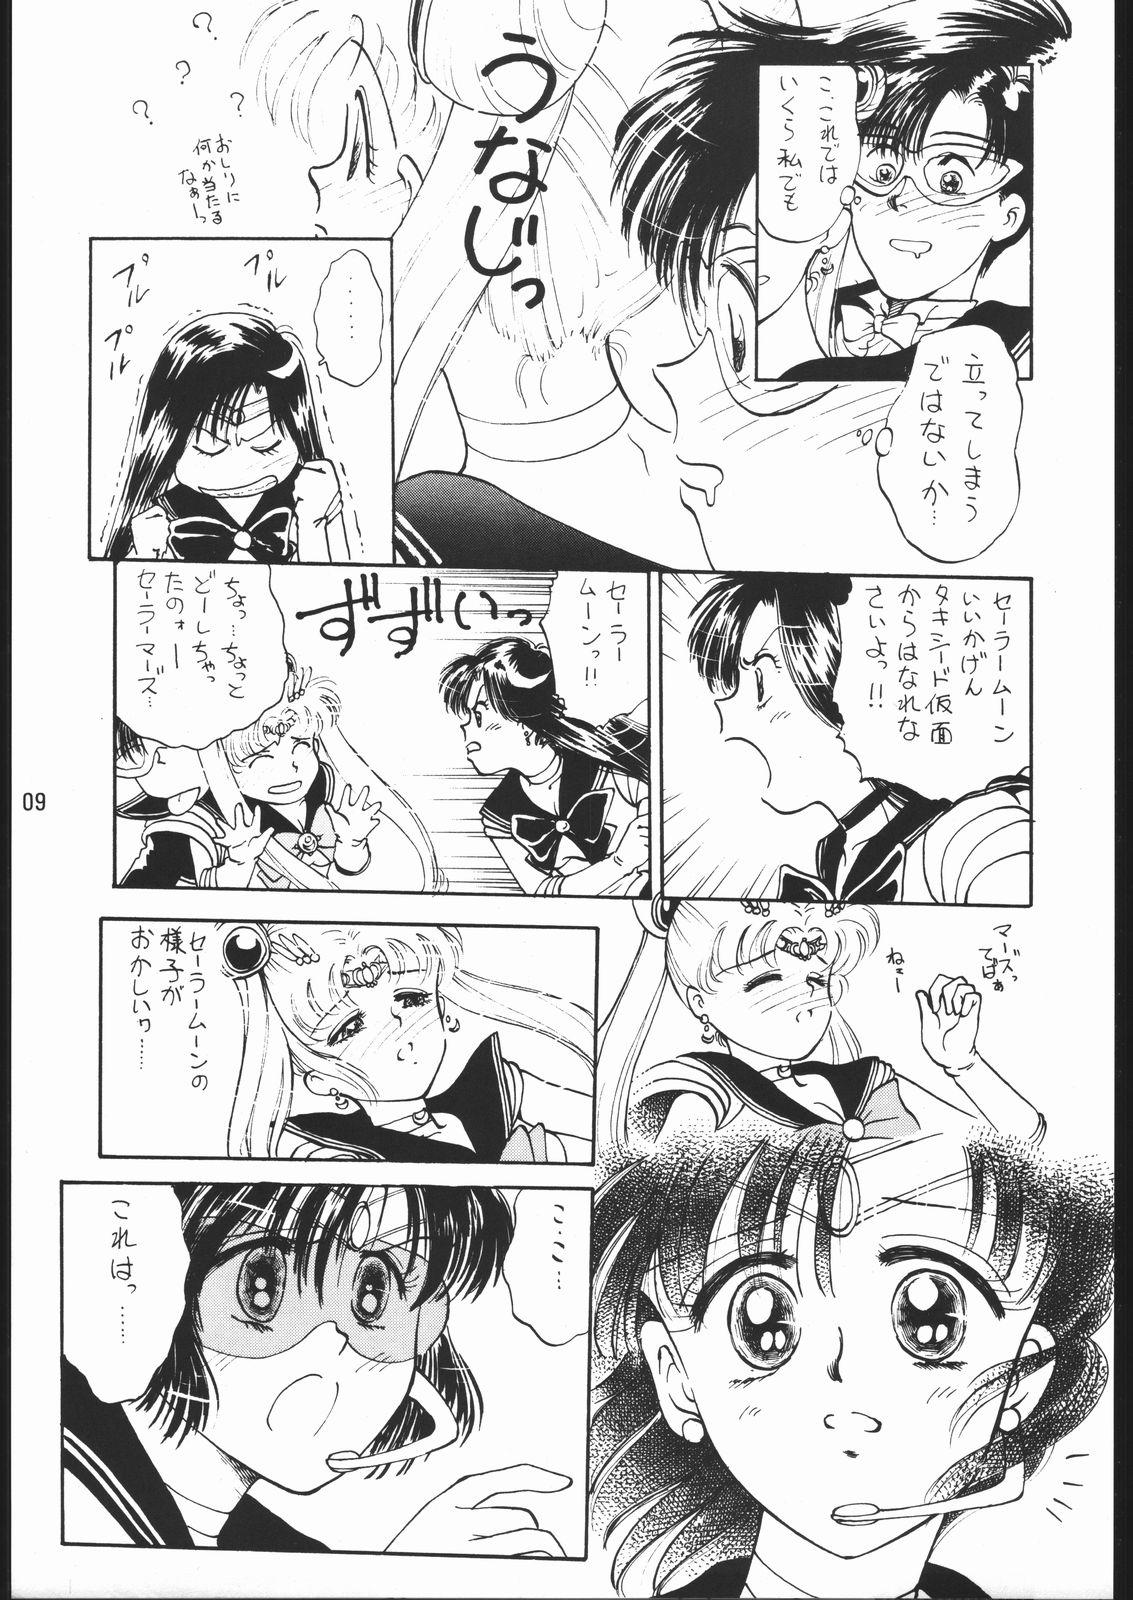 Thuylinh うさぎがピョン!! - Sailor moon Eating Pussy - Page 8